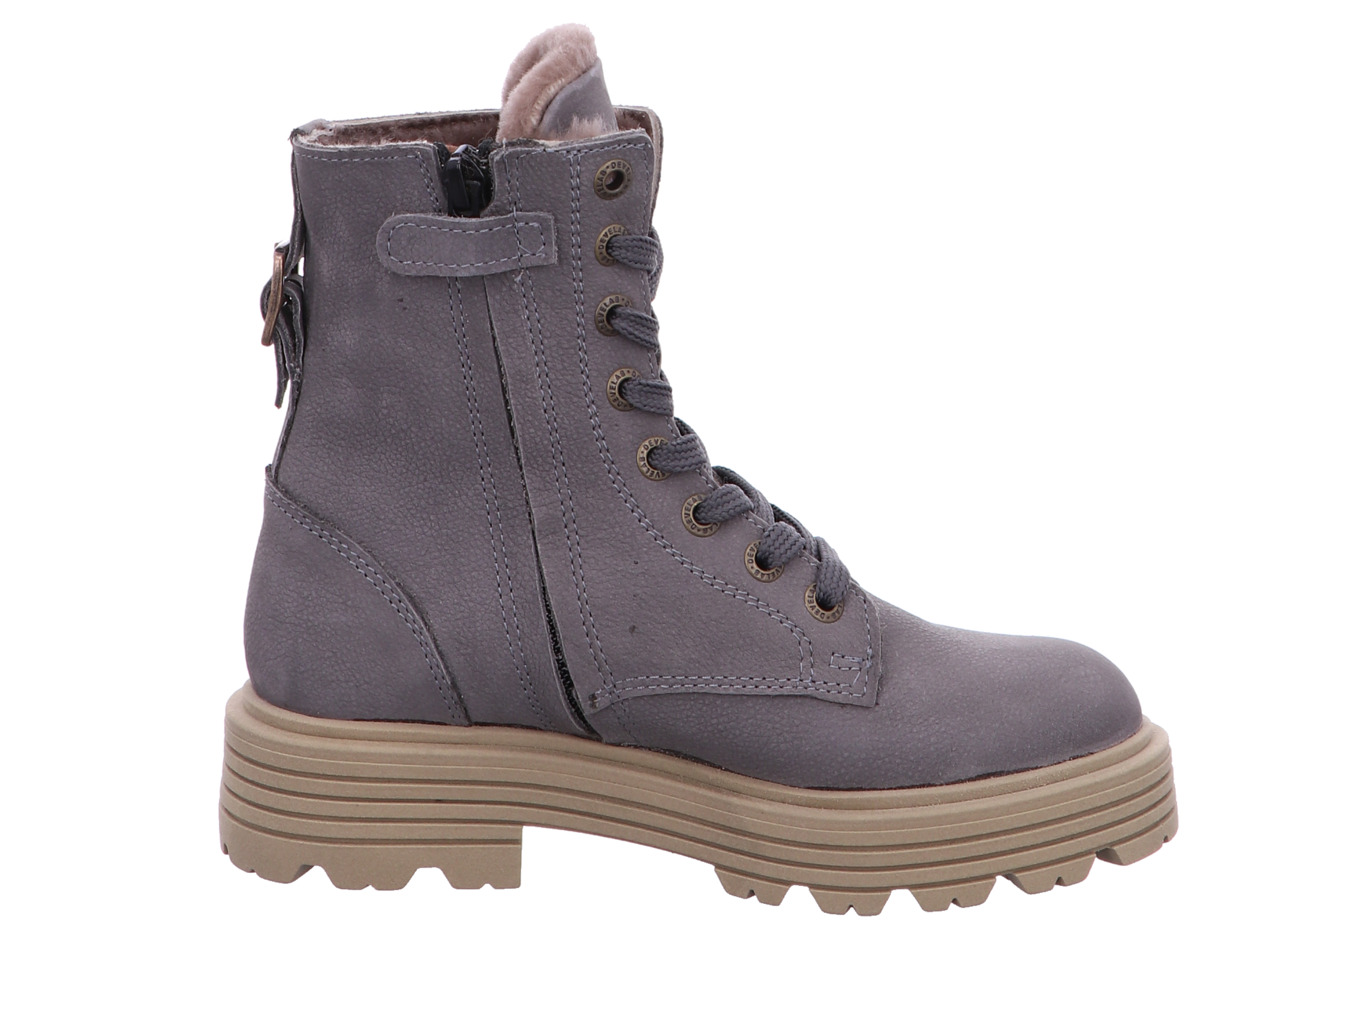 develab_girls_mid_boot_laces_42848_824_4194